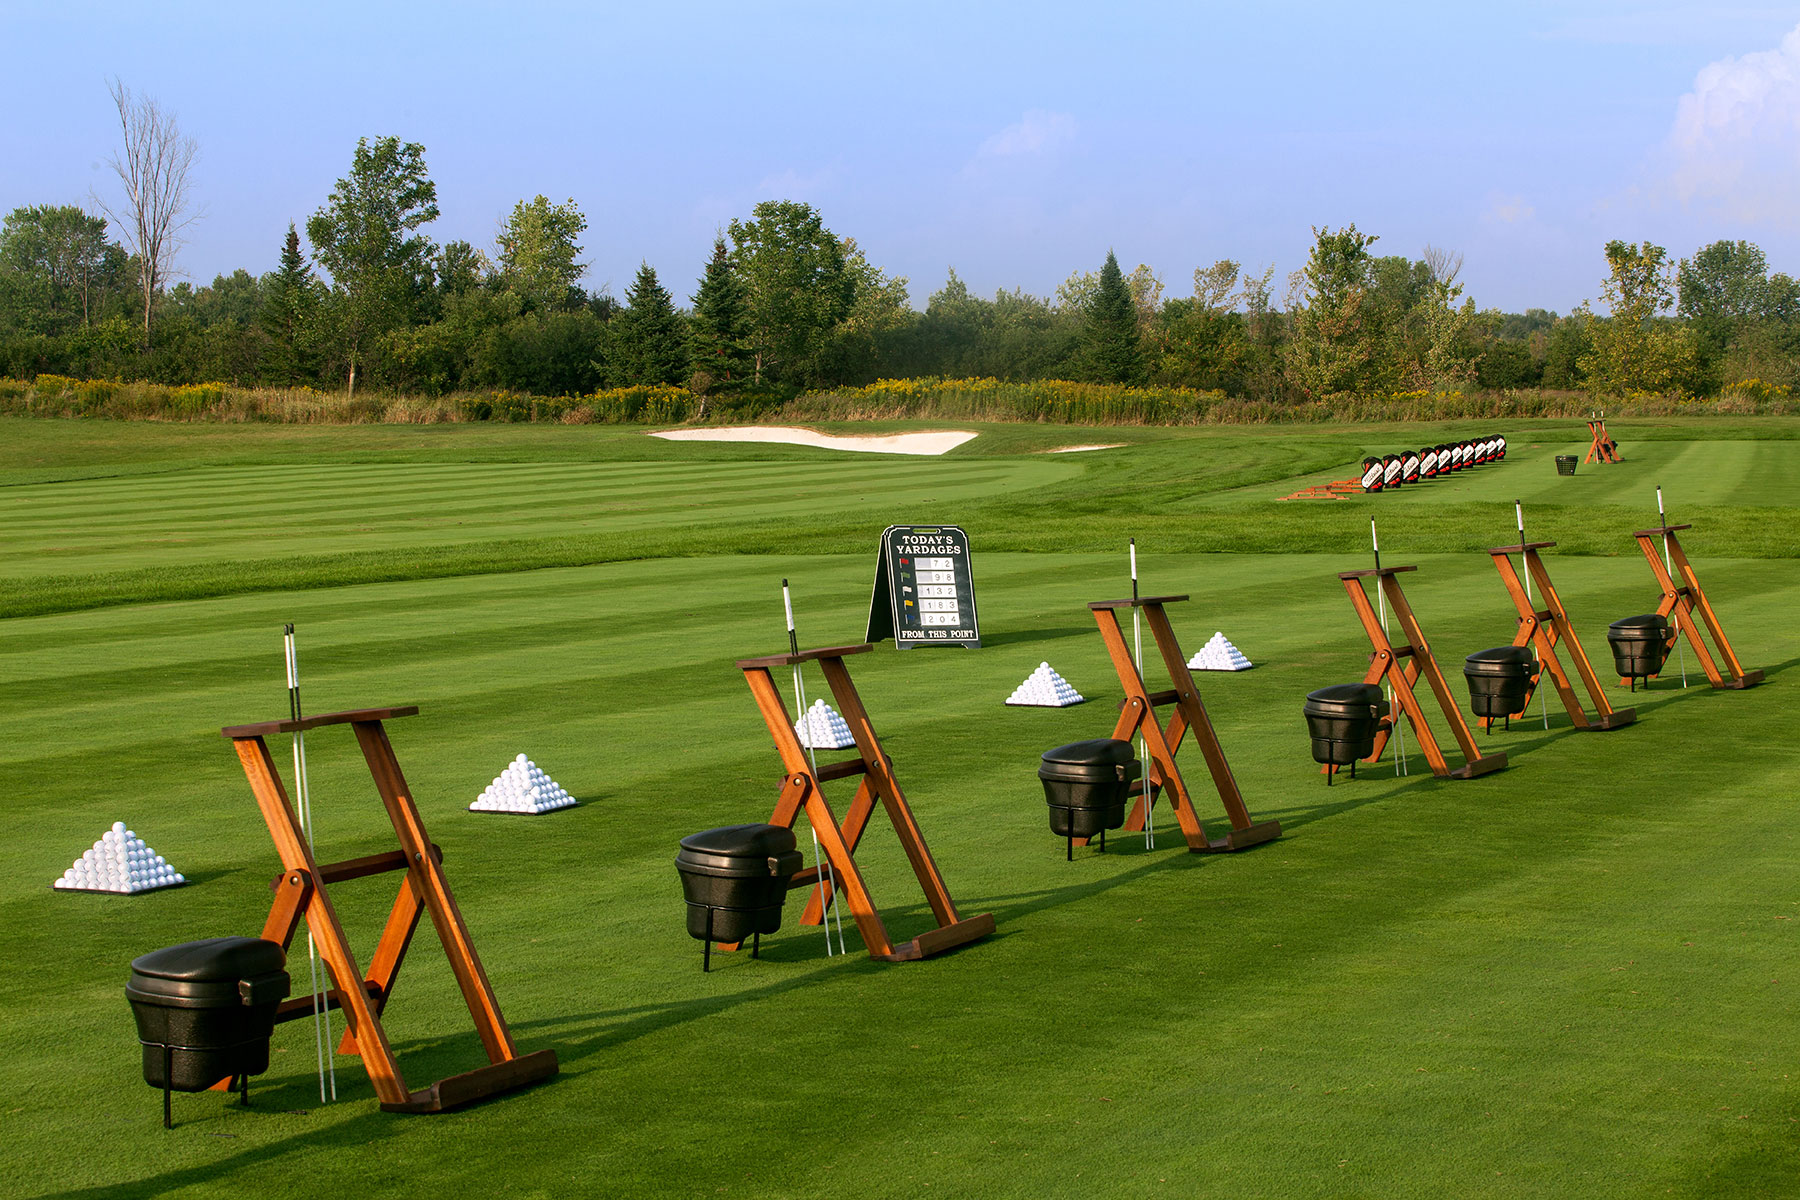 wide view of the golf warm up area with small pyramids of golf balls ready to be driven